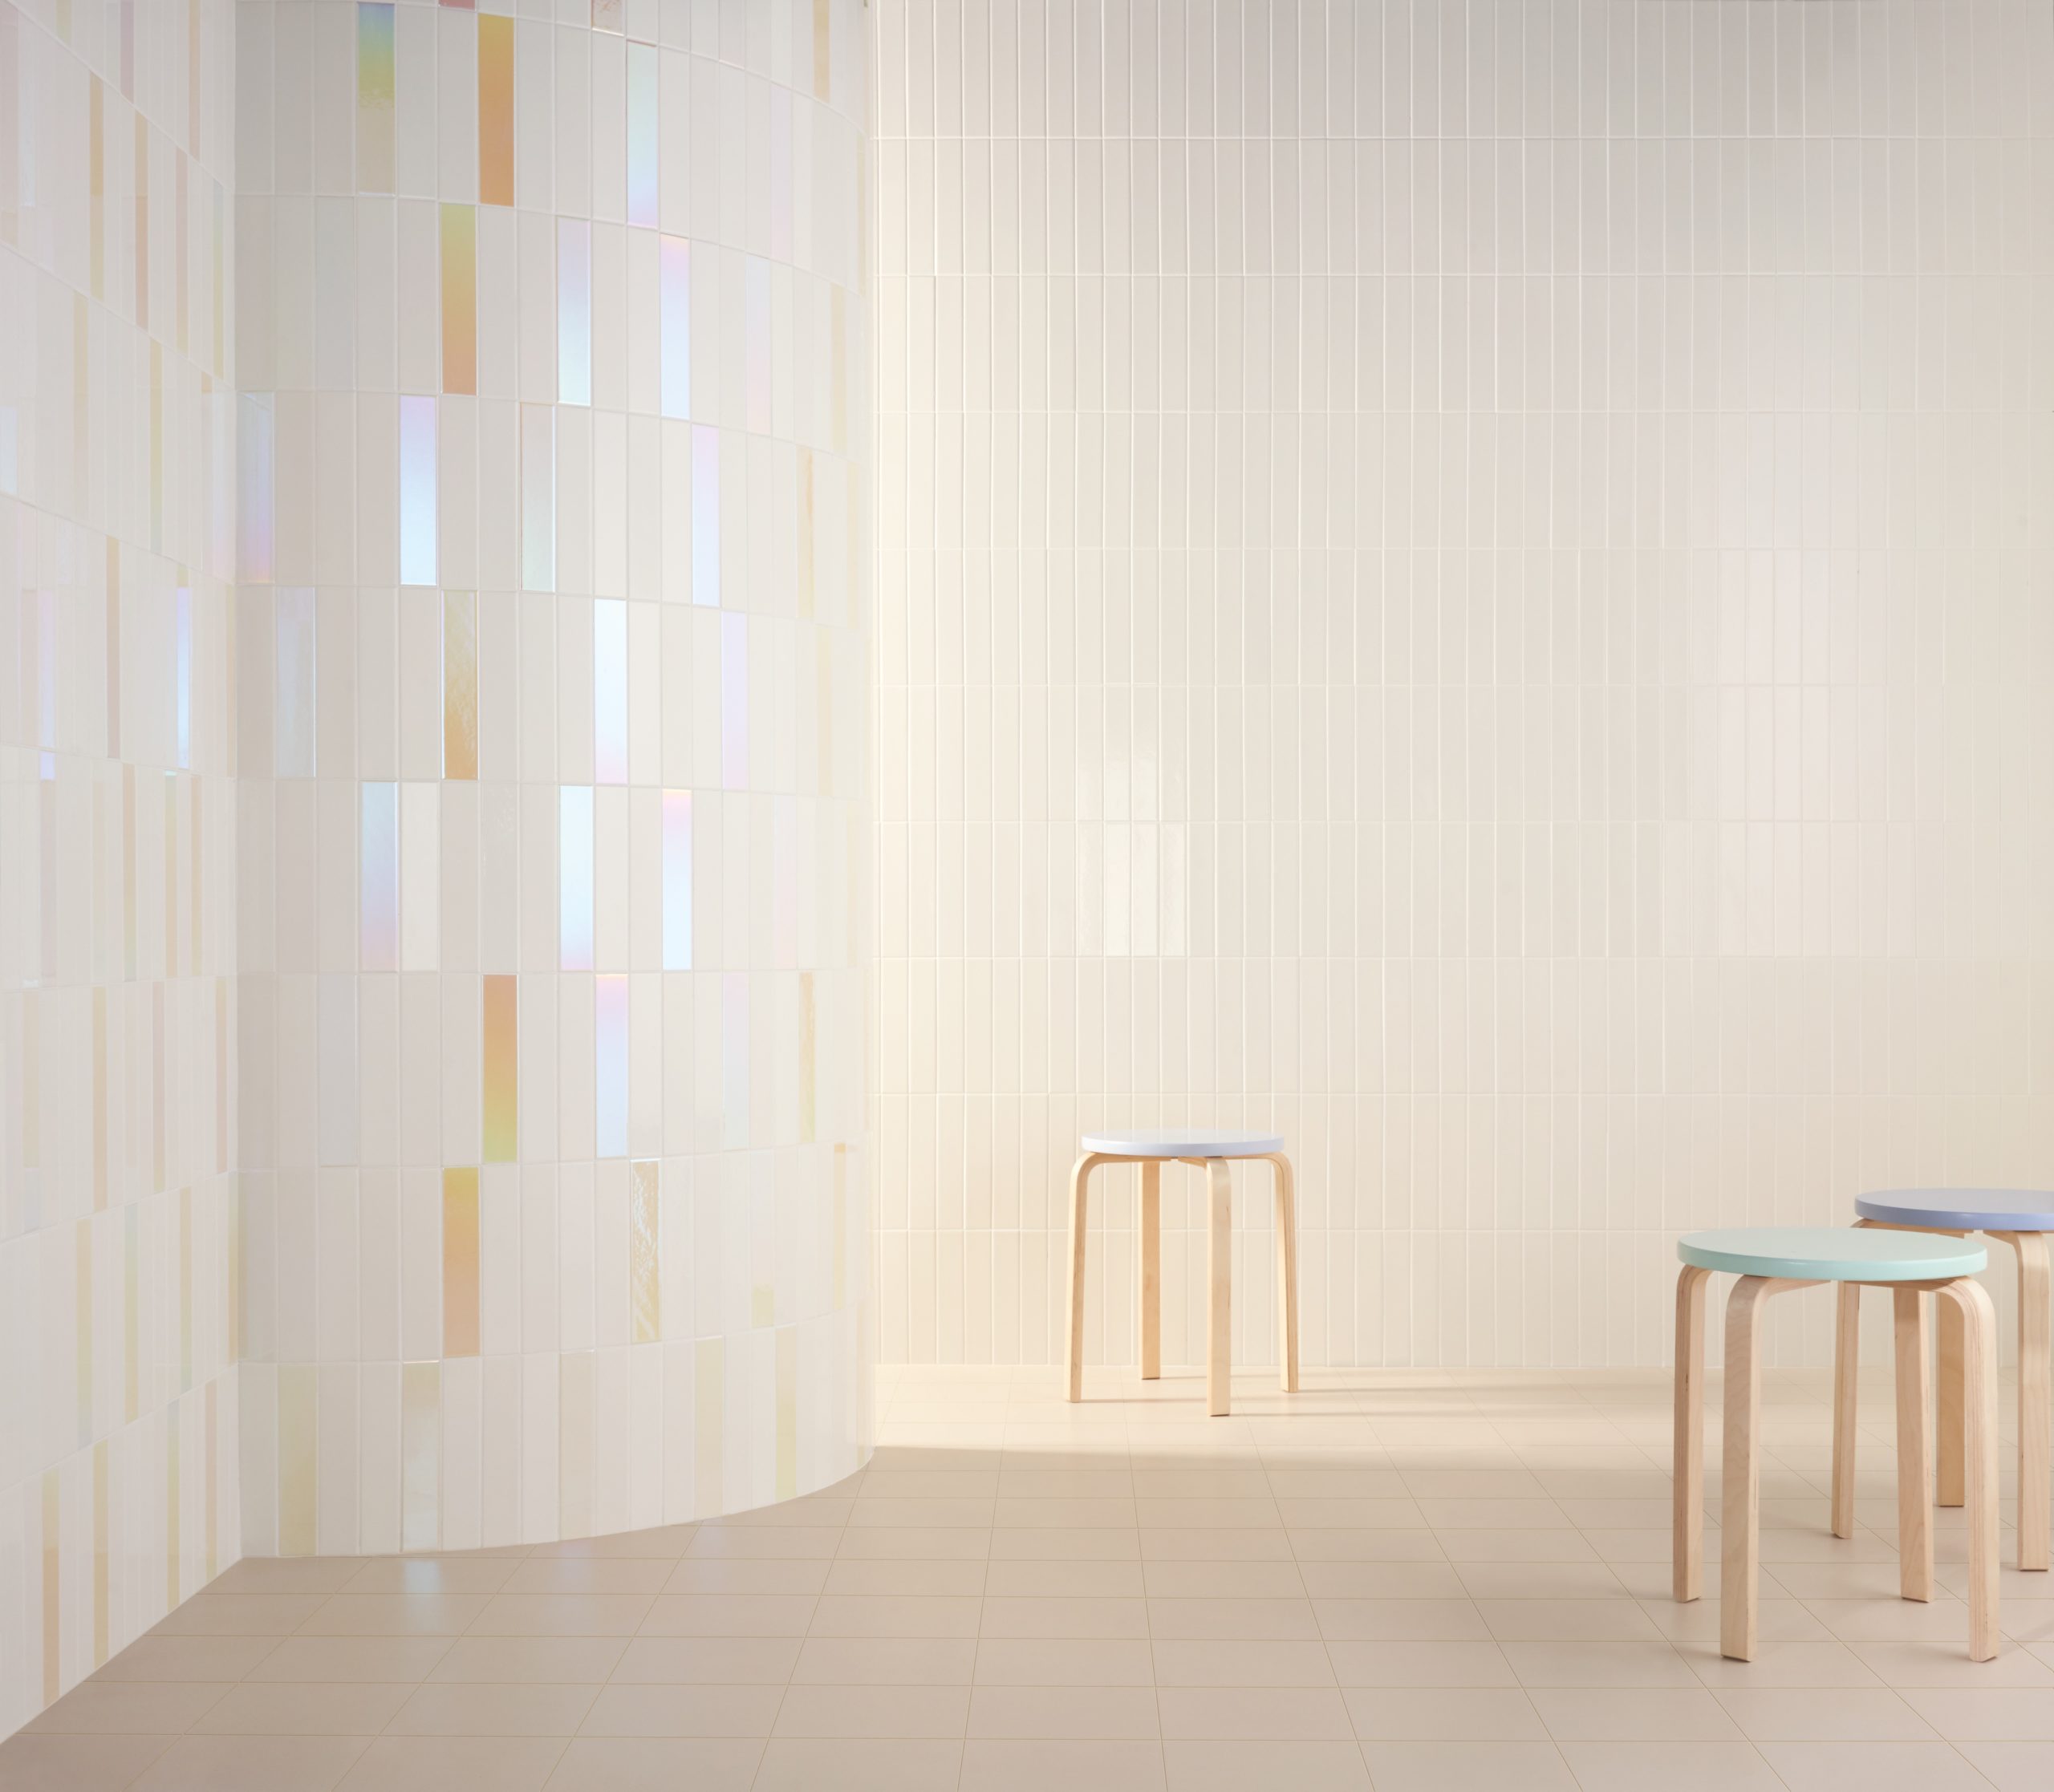 Tiles from Nemo Tile + Stone's Glow collection